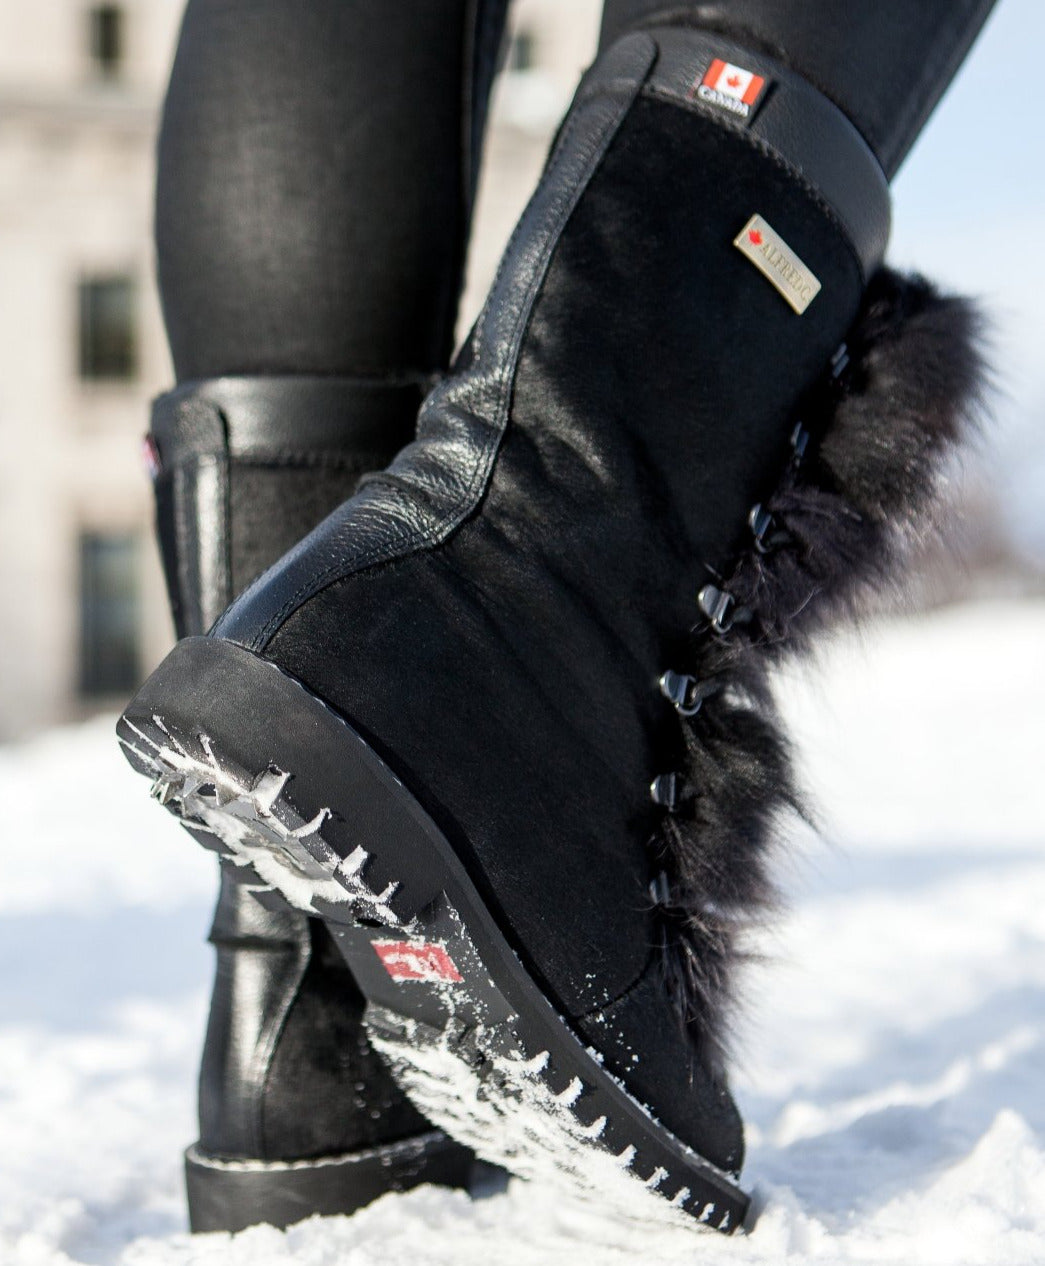 women's snow boots with retractable spikes